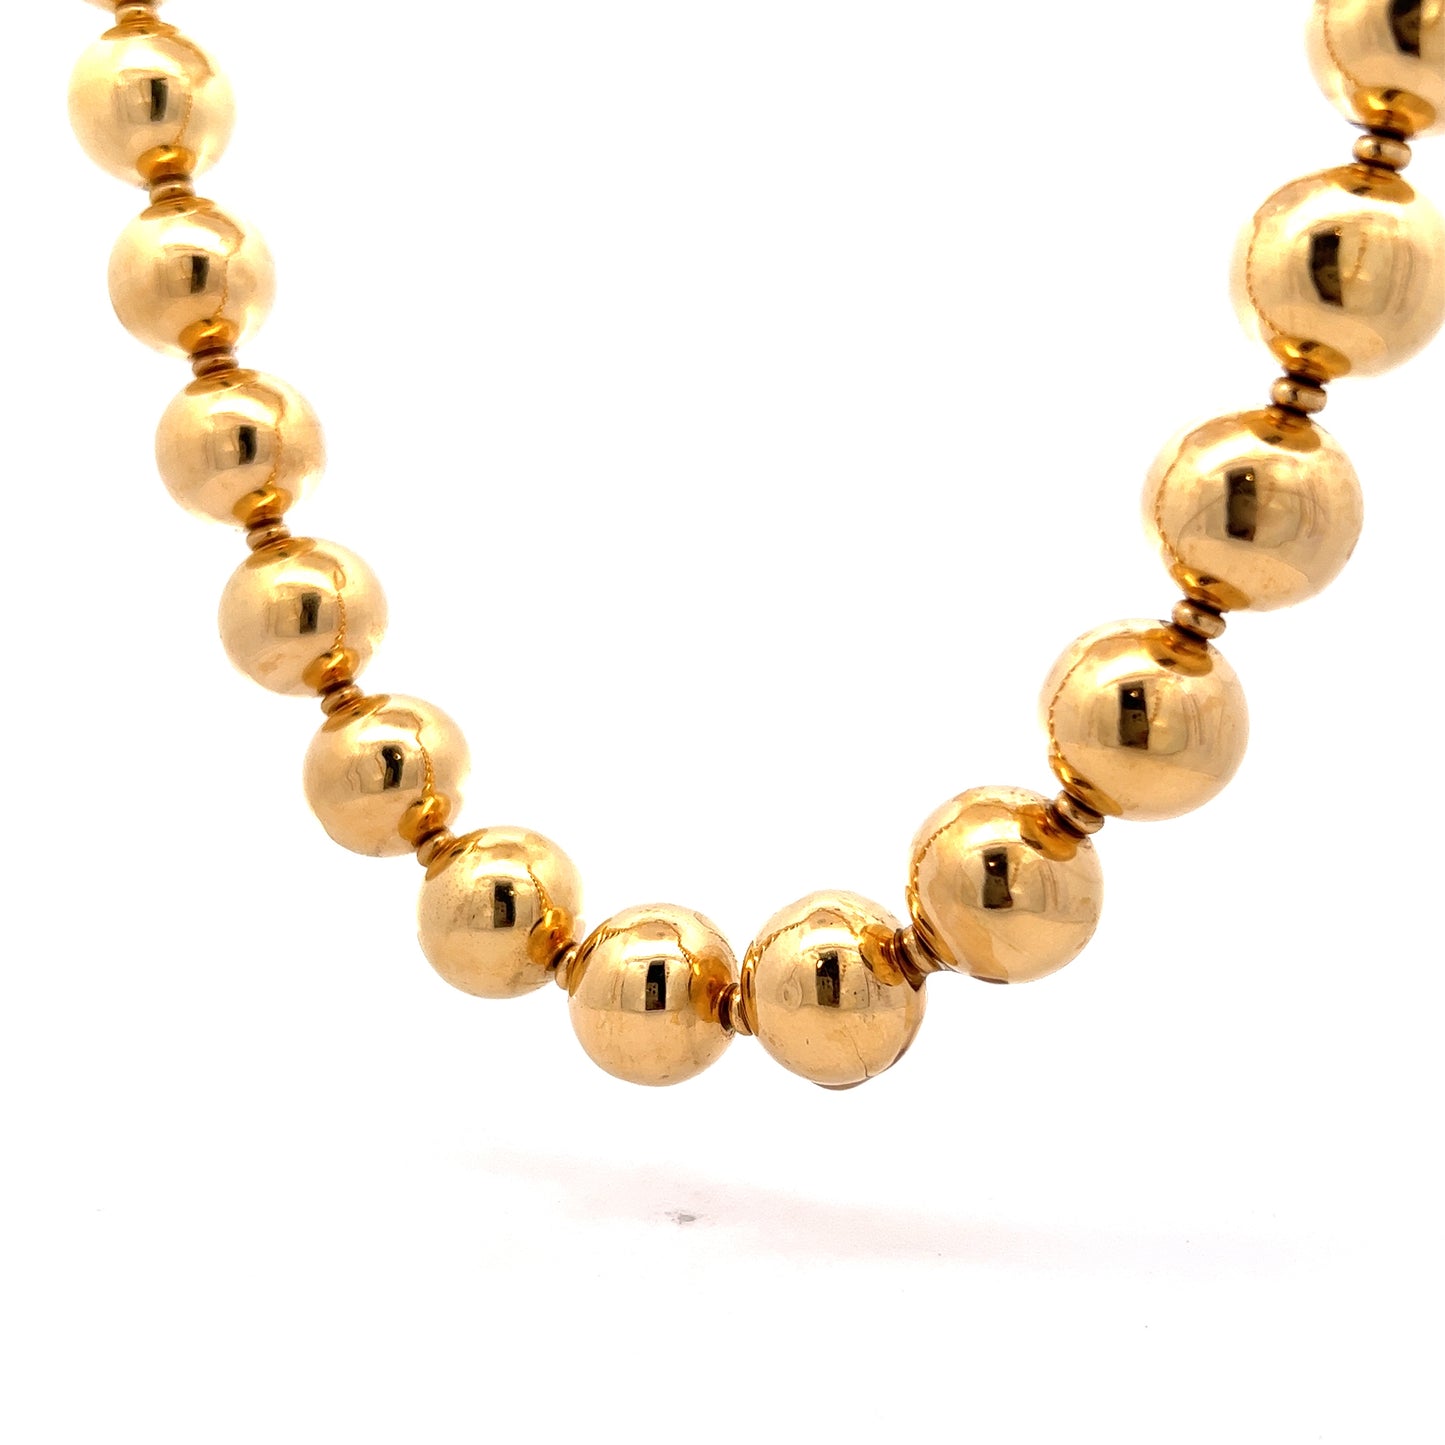 17" Hollow Gold Bead Necklace in 18k Yellow Gold